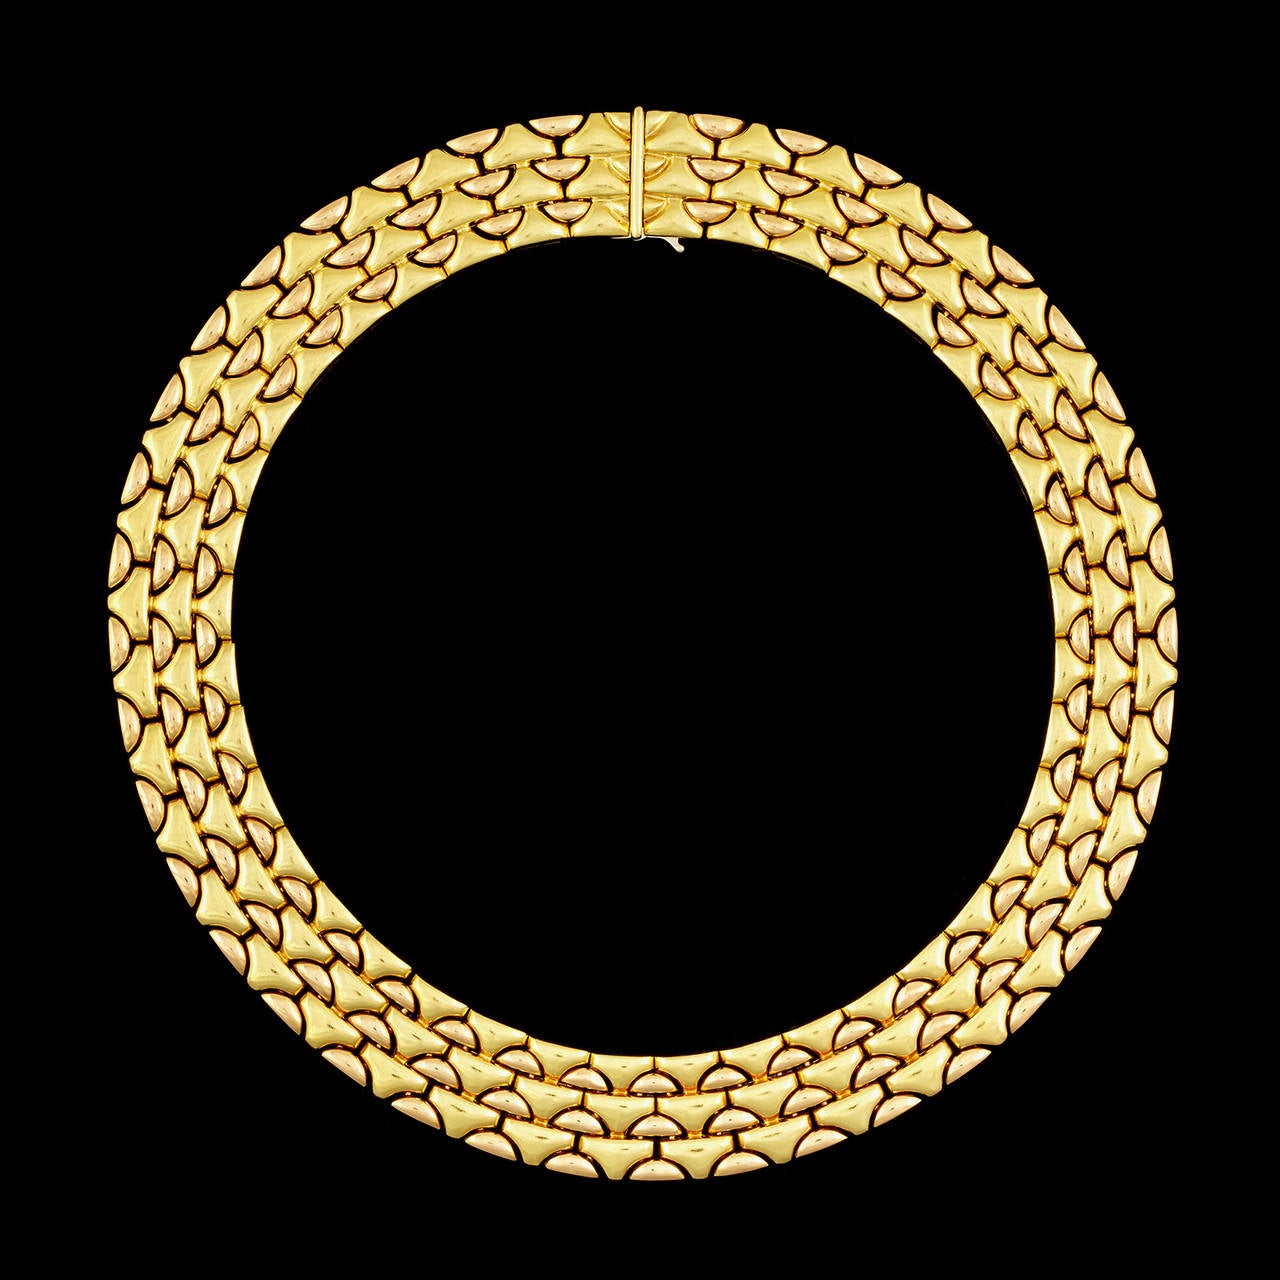 Bulgari Necklace Features Softly Curved Links of 18Kt Yellow and Rose Gold. The necklace measures 16 inches long and 17mm wide. This piece totals 188.9 grams.